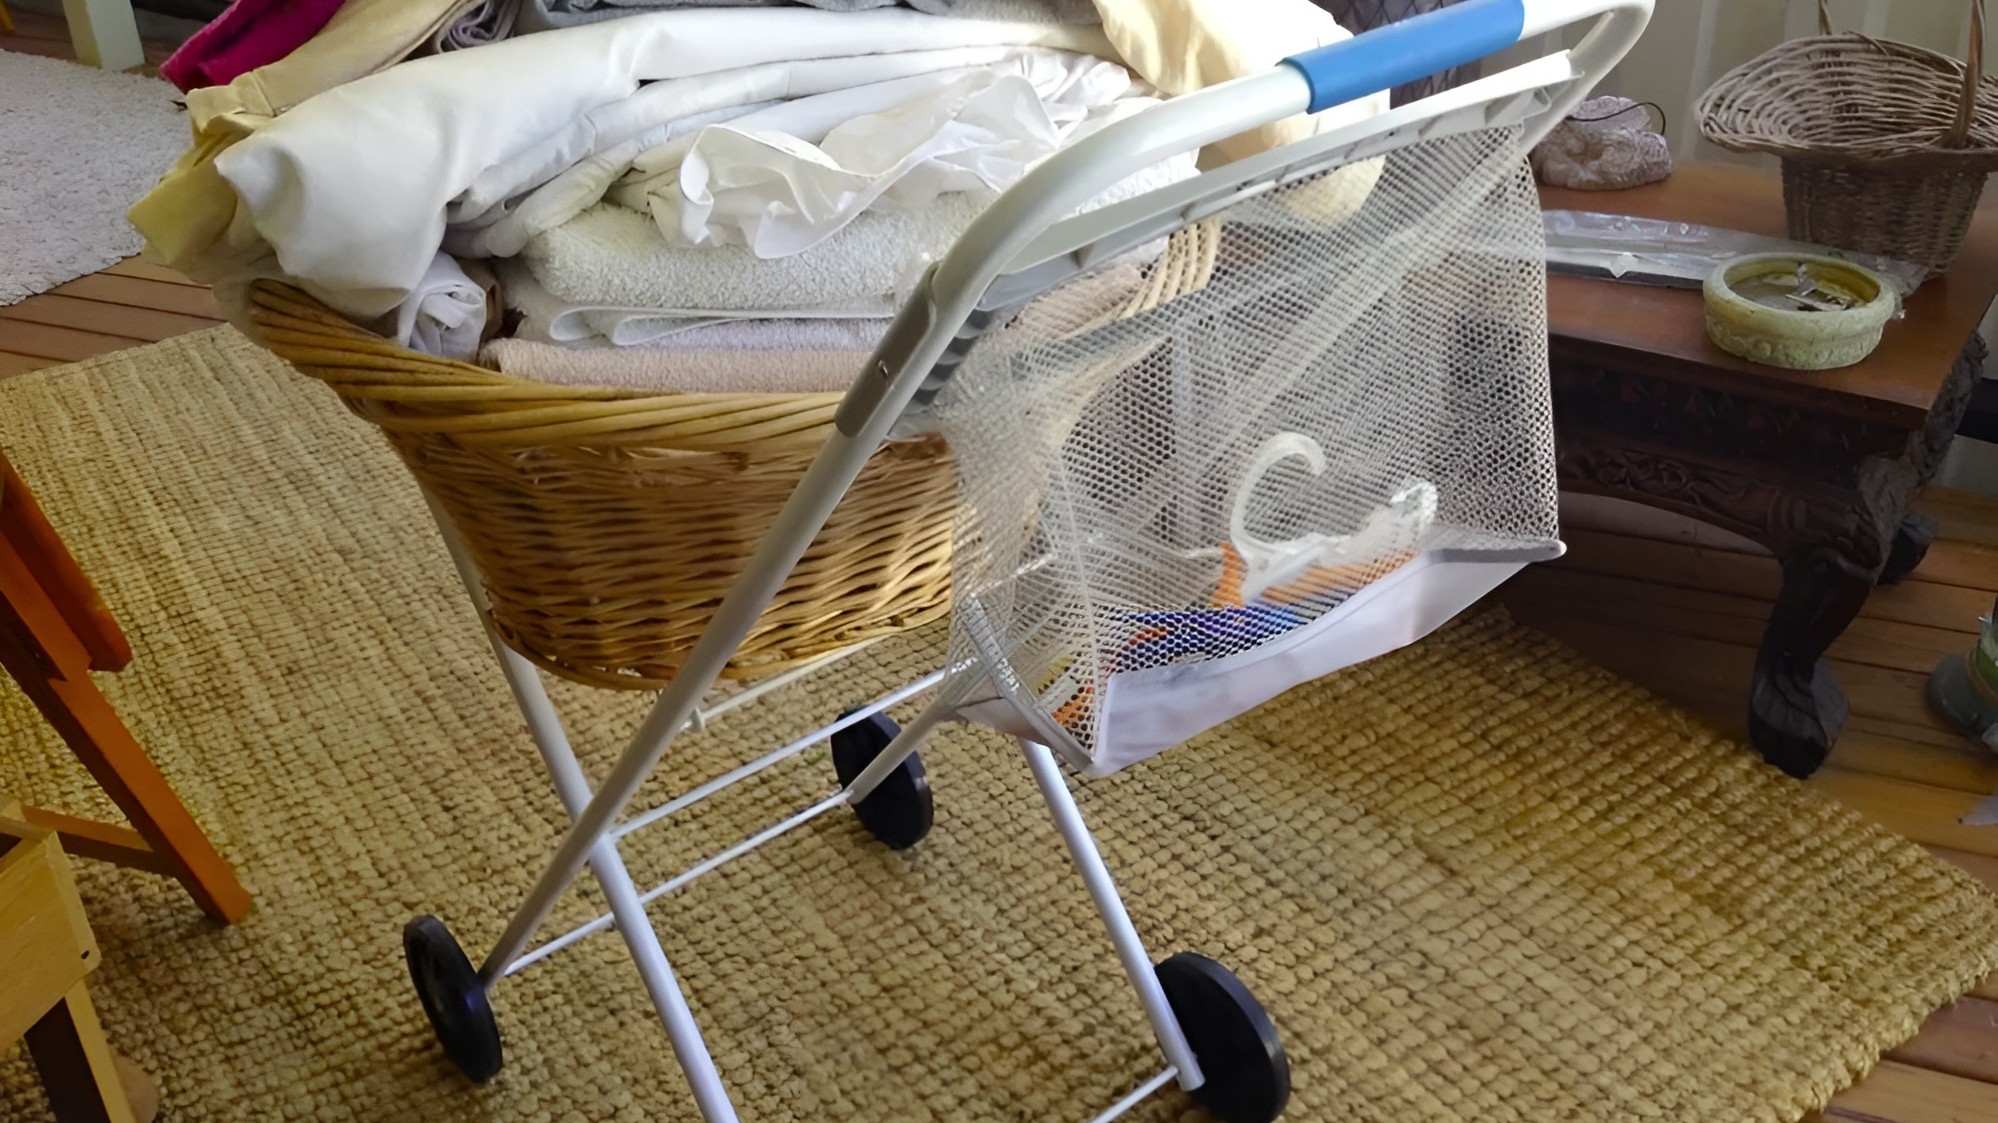 Clothes Line on Wheels Laundry Trolley